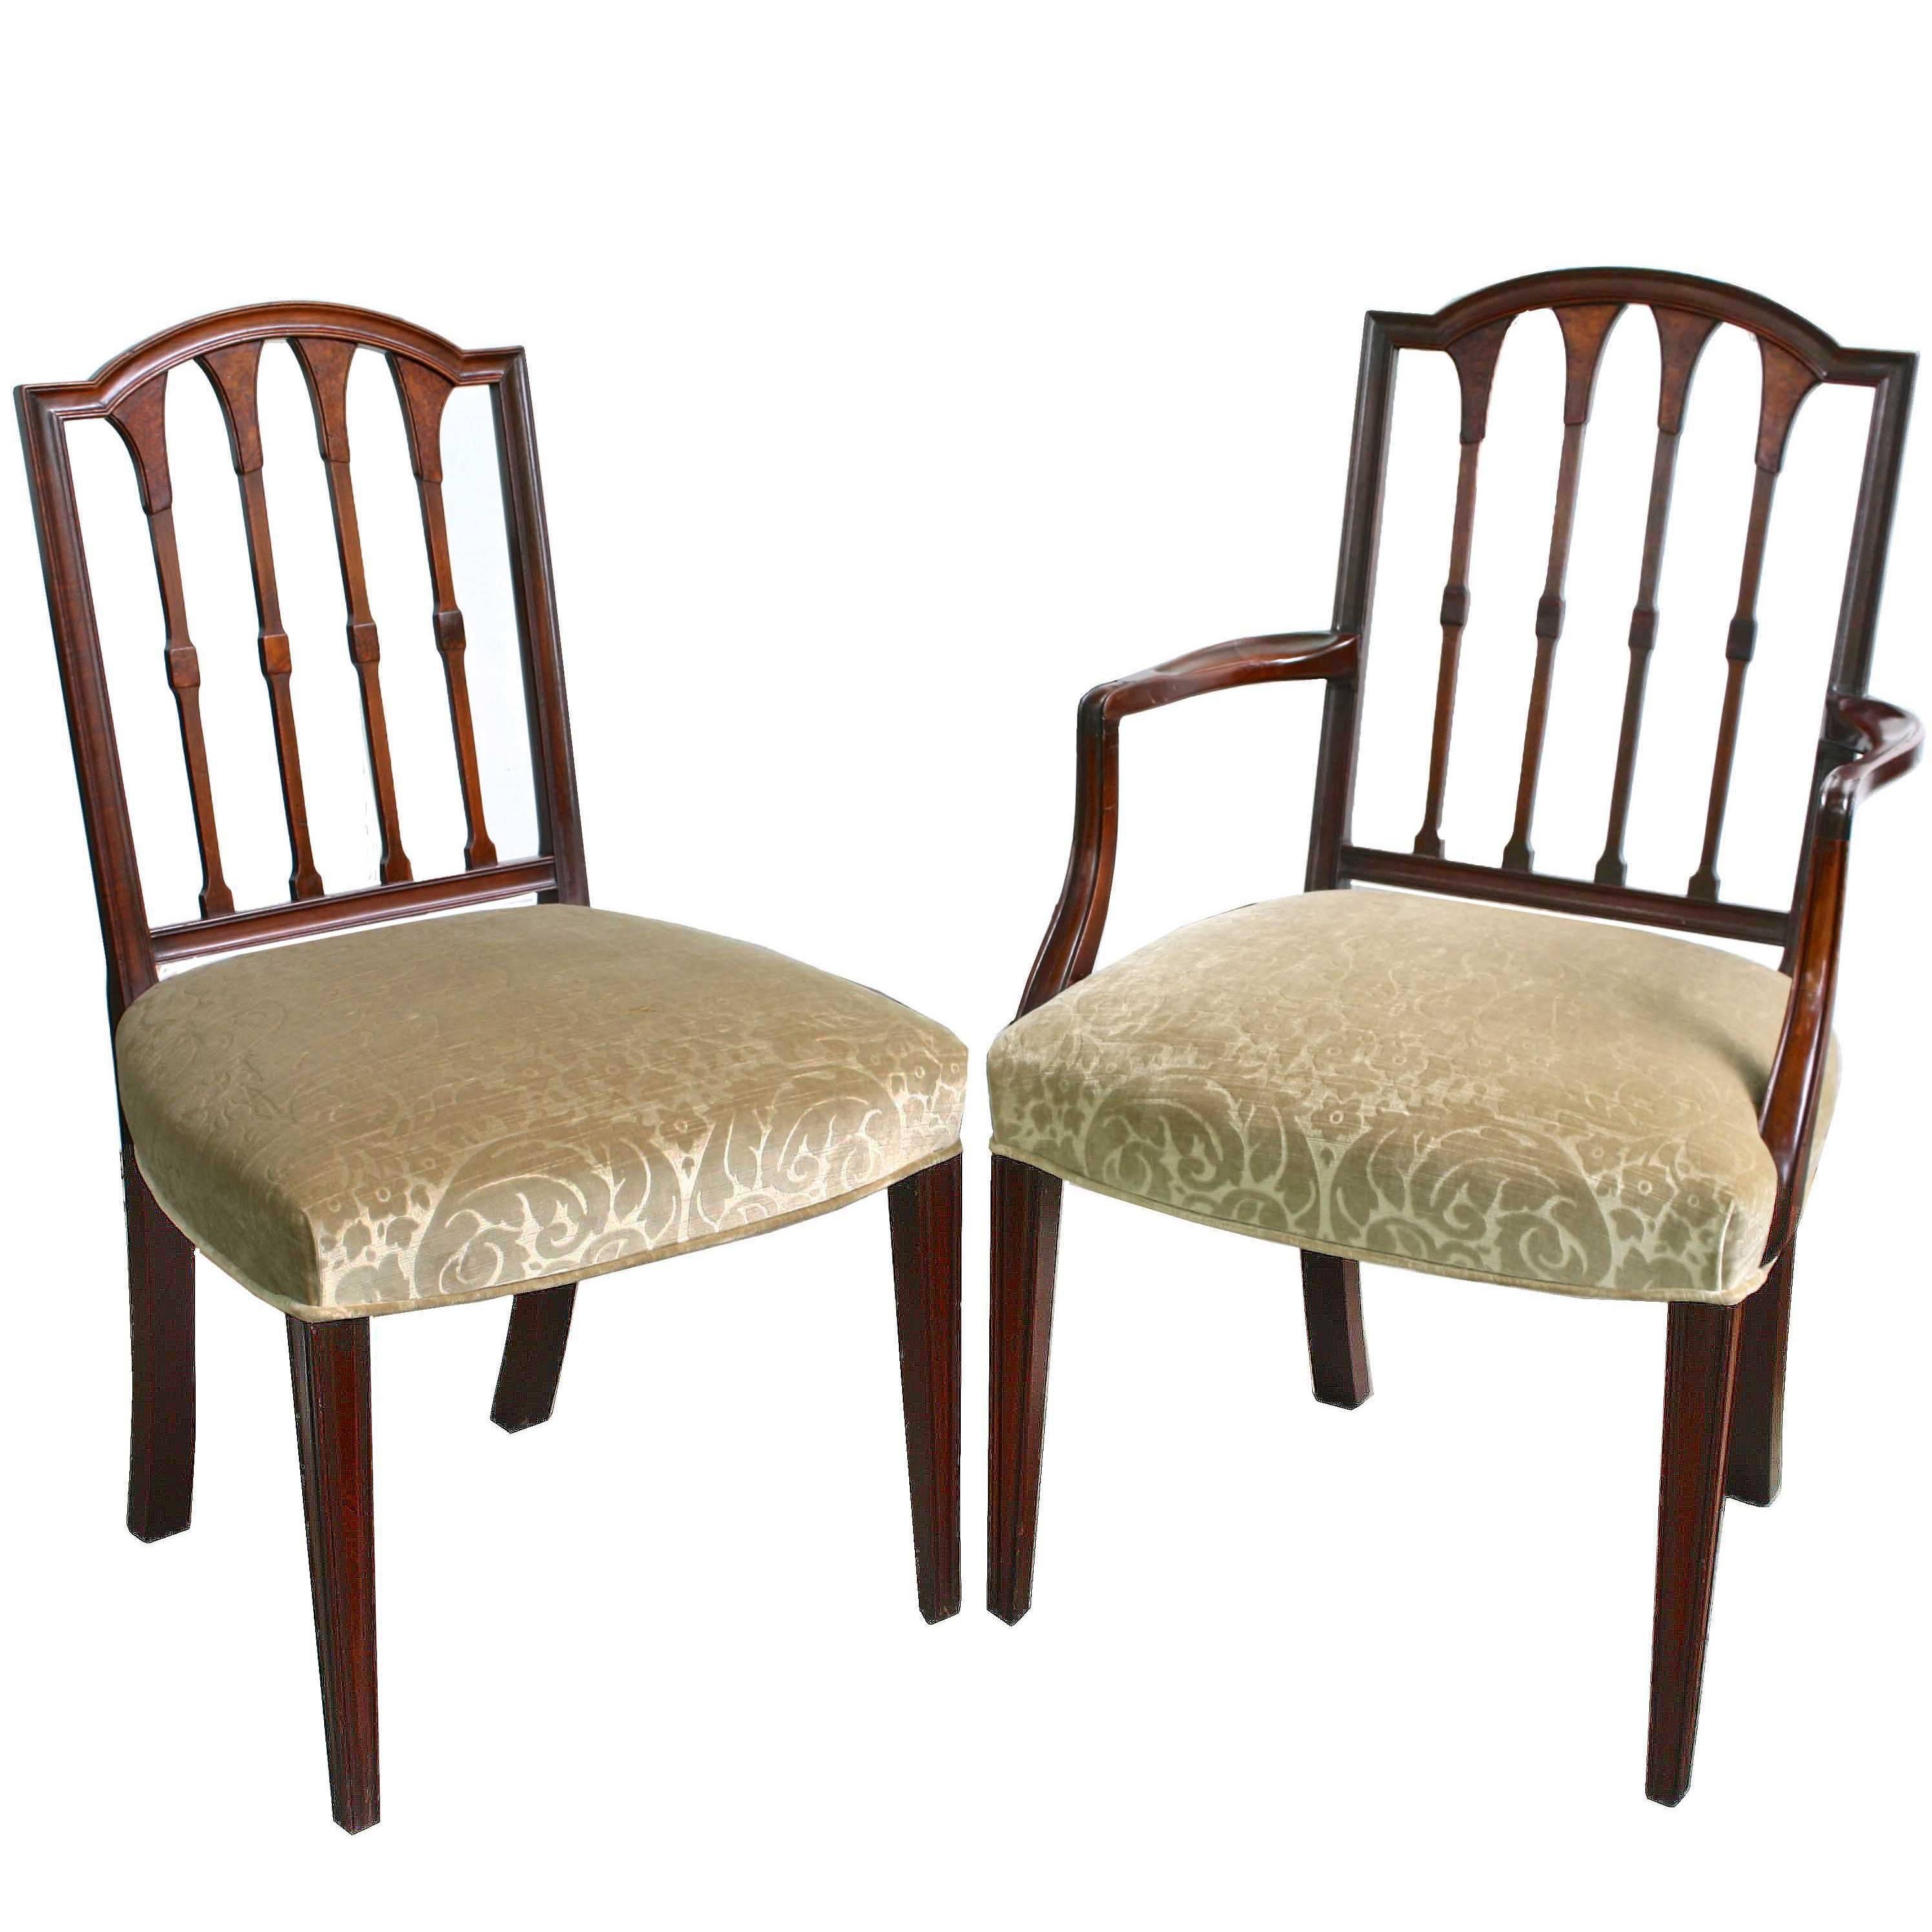 EIGHT American Hepplewhite Revival Dining Chairs For Sale